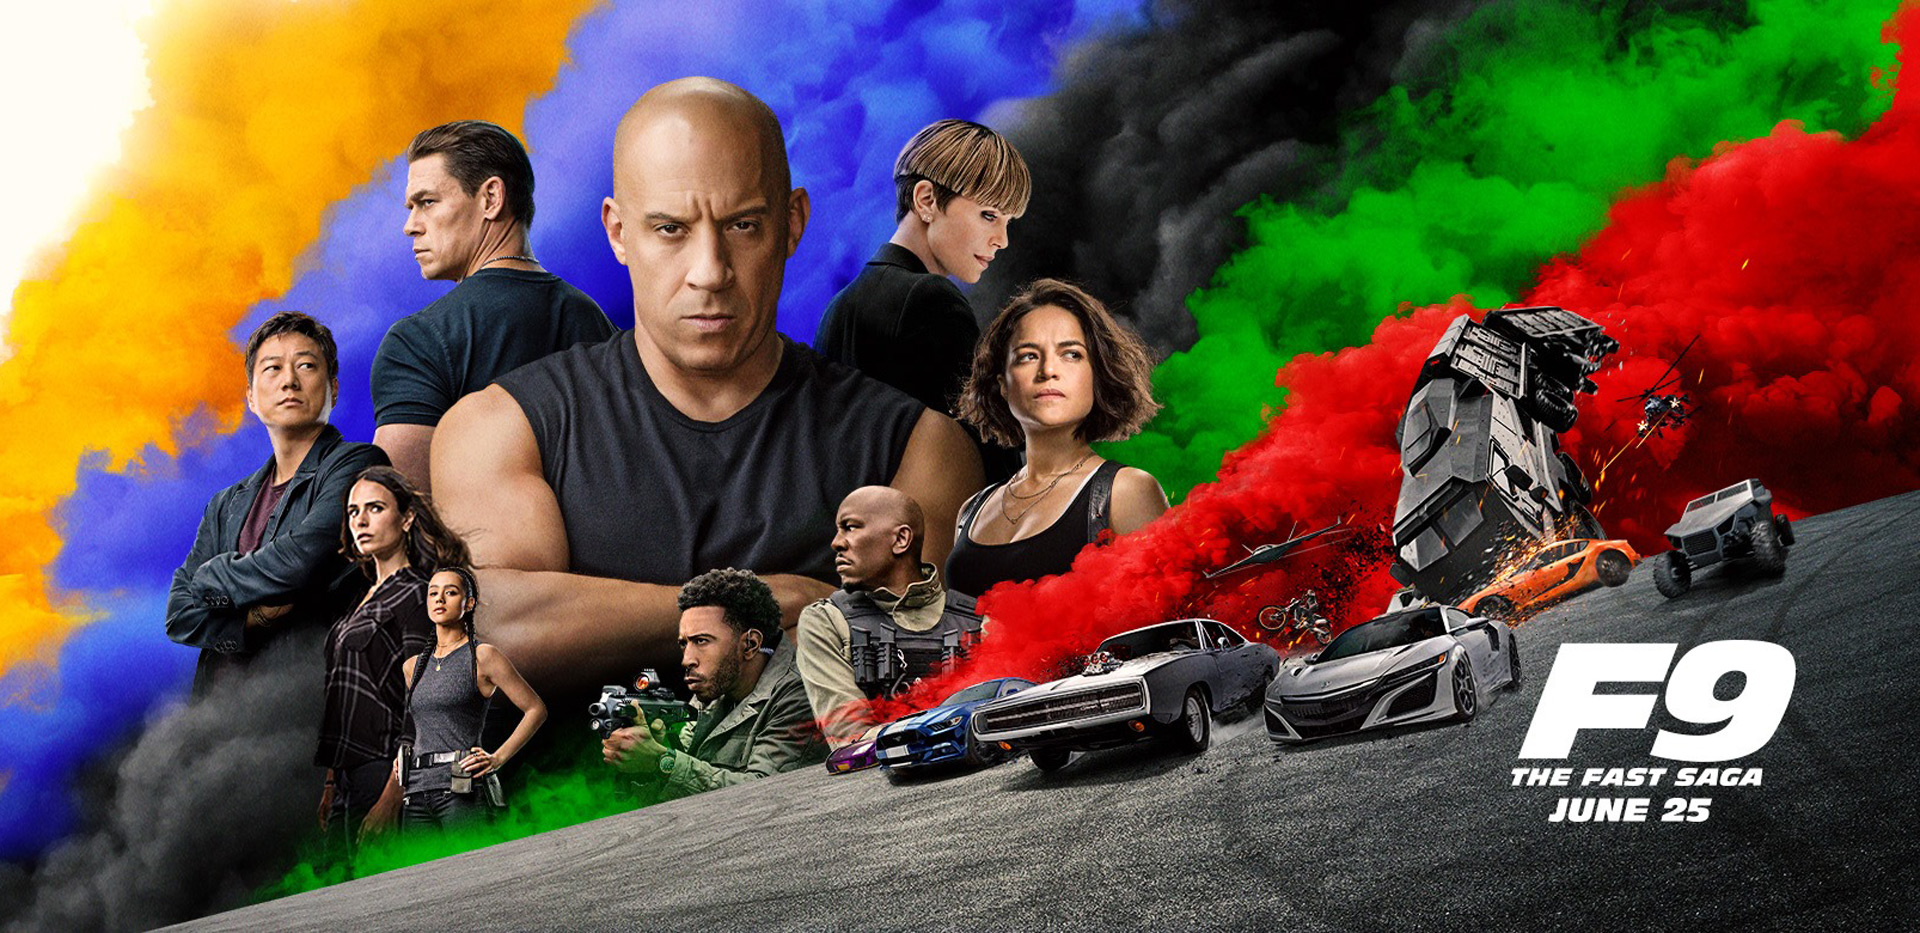 The "Fast and Furious" saga will end in 2024 after 11 movies